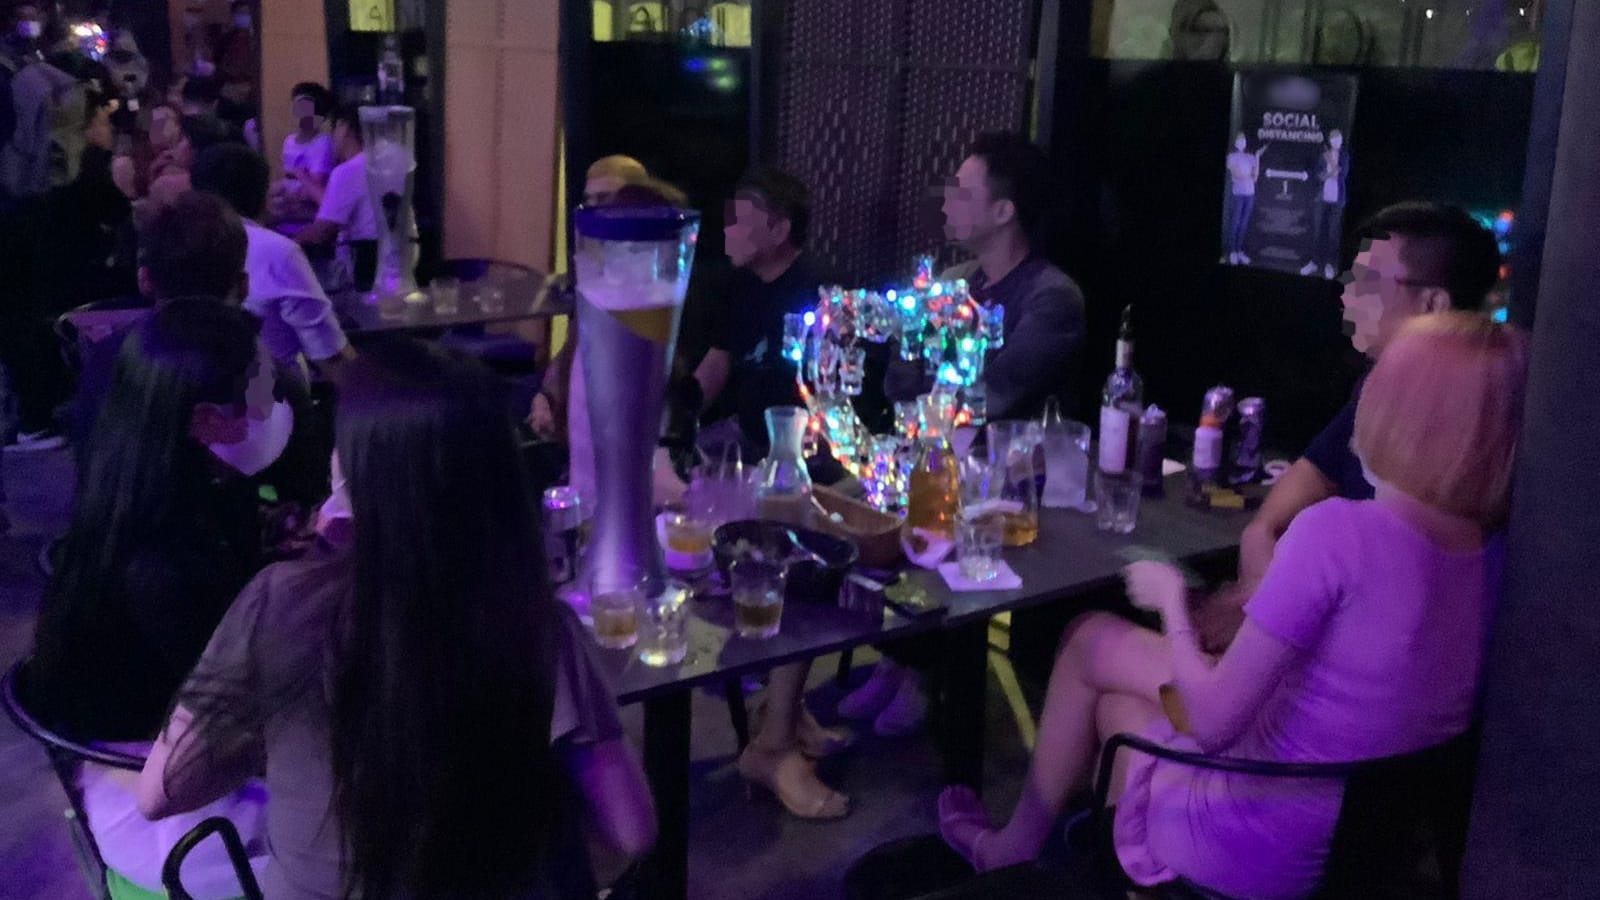 99 people investigated over various breaches at massage parlours, nightlife outlets